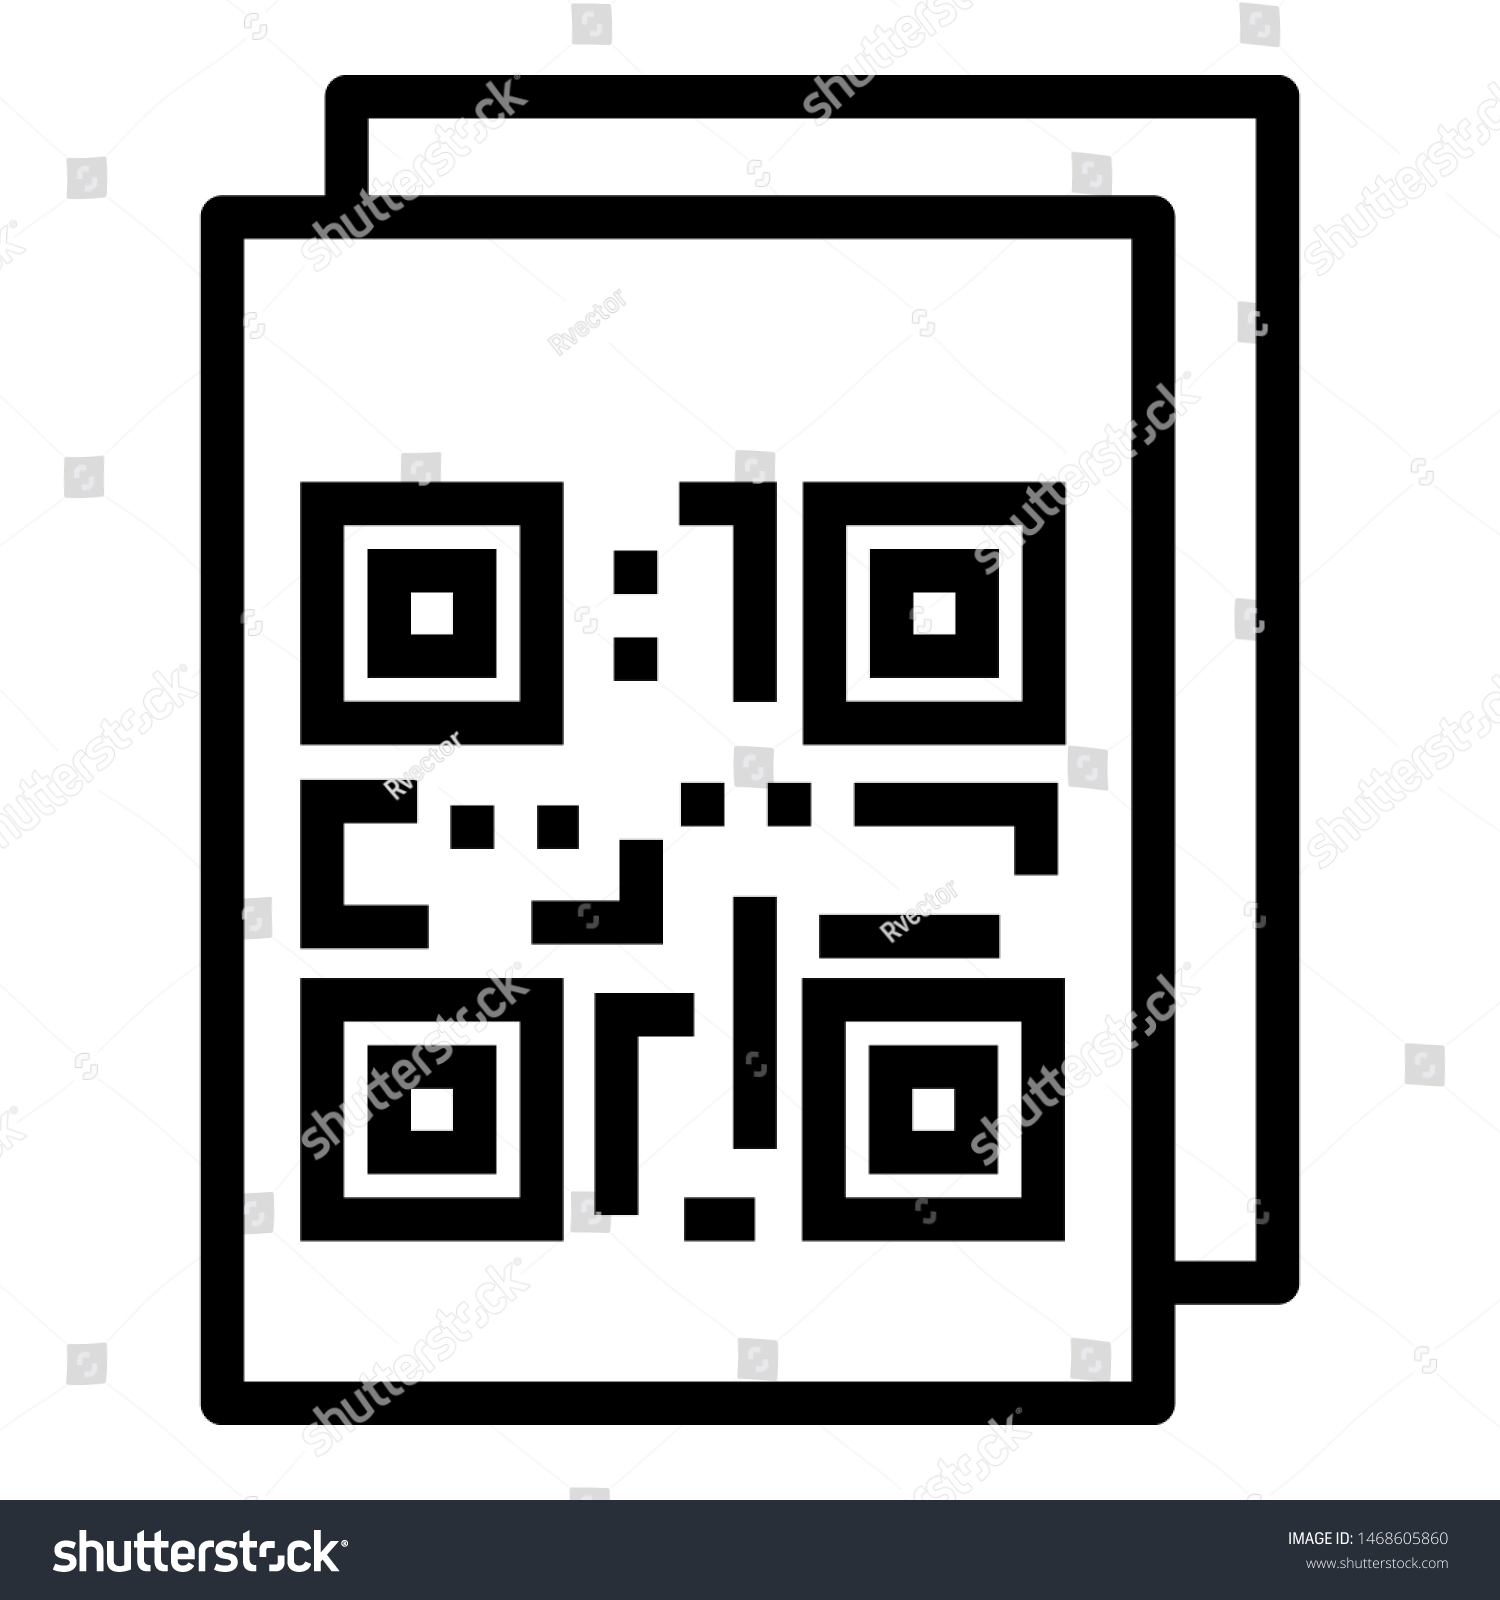 QR code stickers icon. Outline QR code stickers icon for web design isolated on white background #1468605860